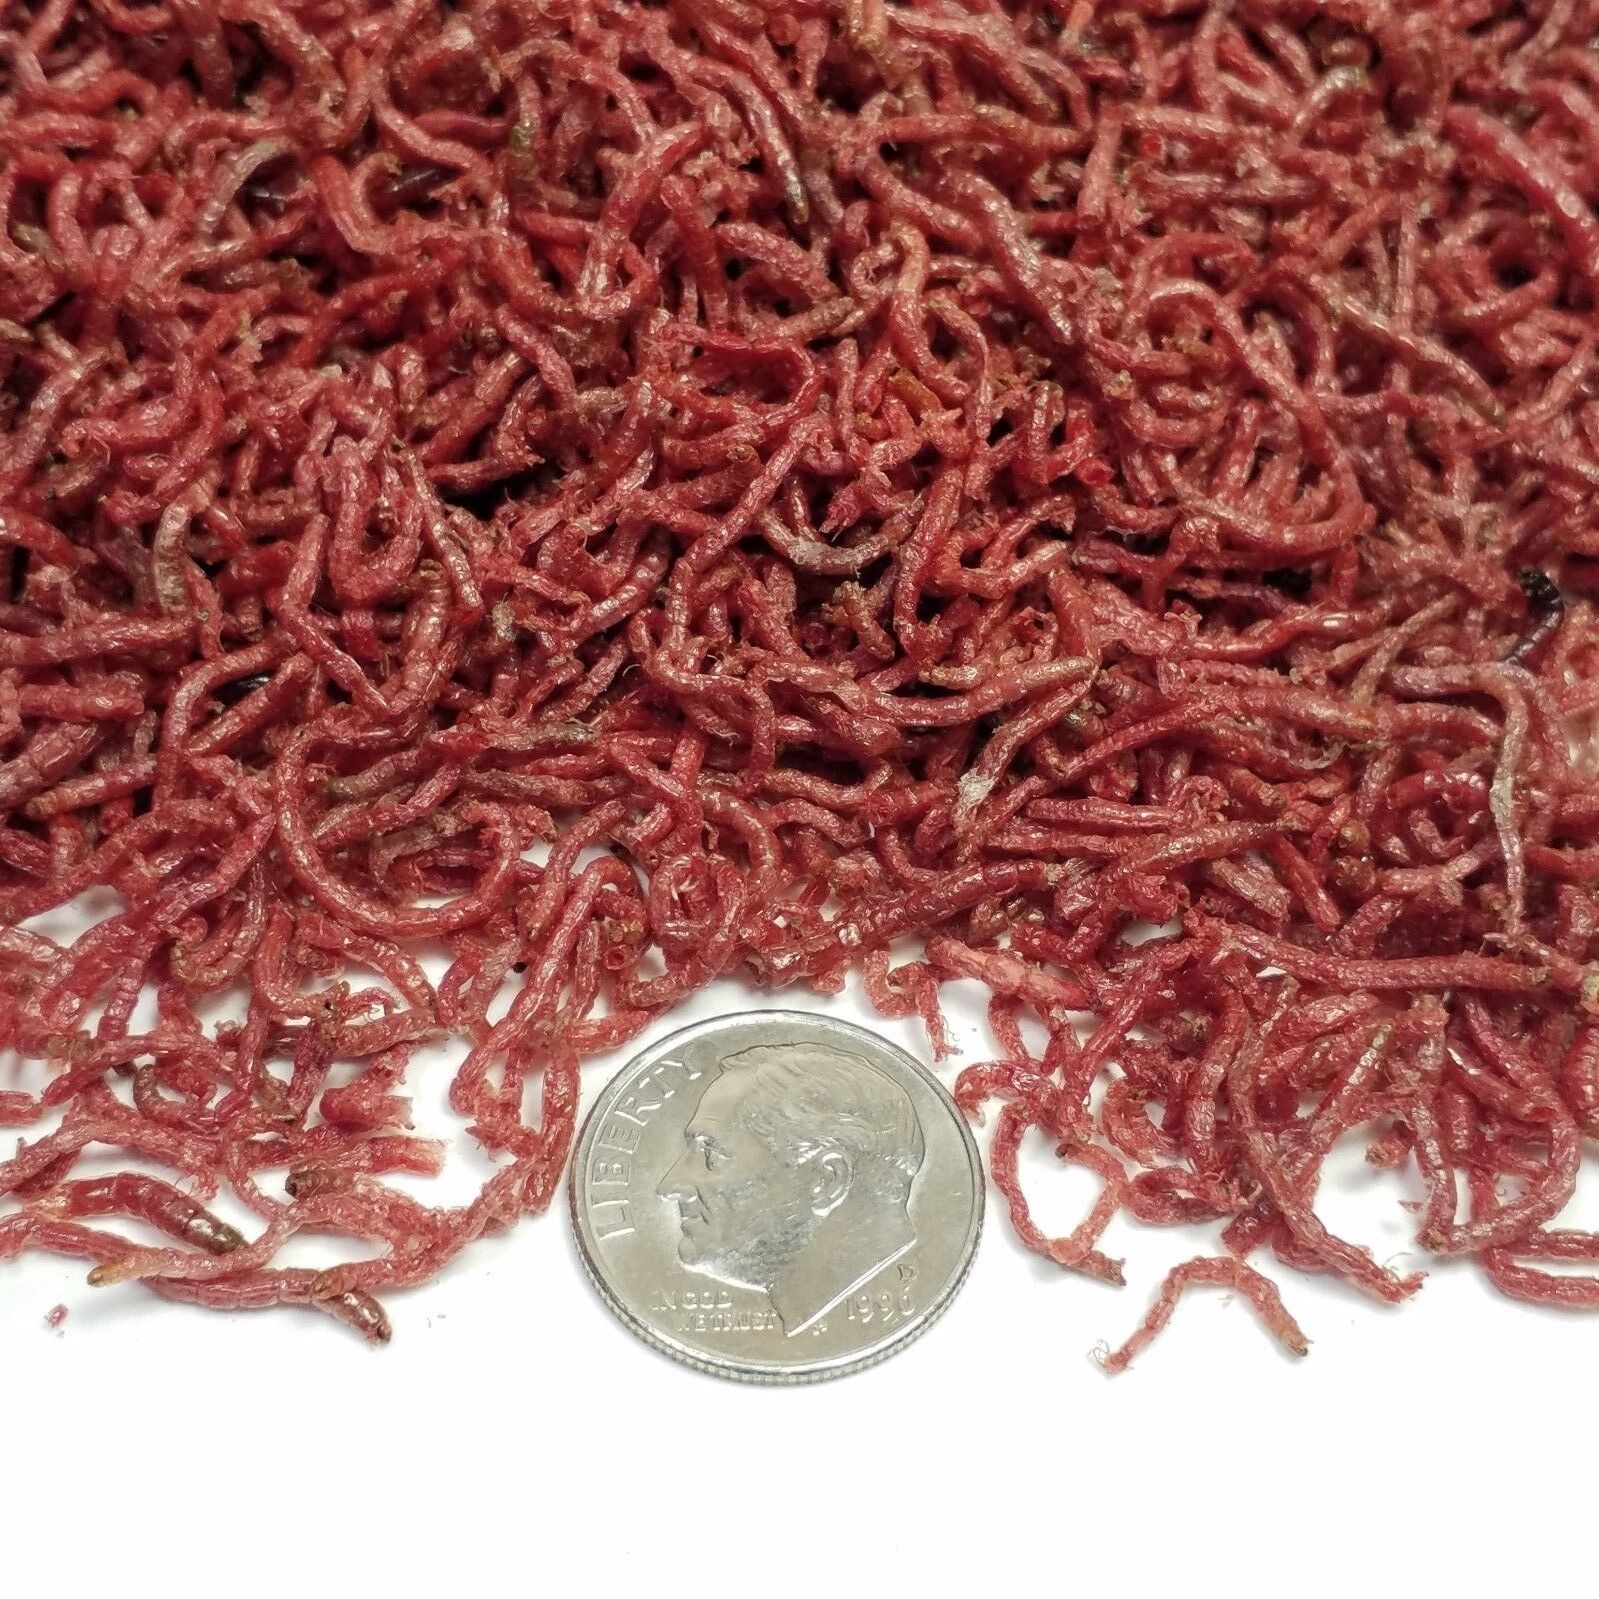 Bloodworms, PREMIUM GRADE Freshly Freeze Dried Bloodworms, Less than10-Days old.